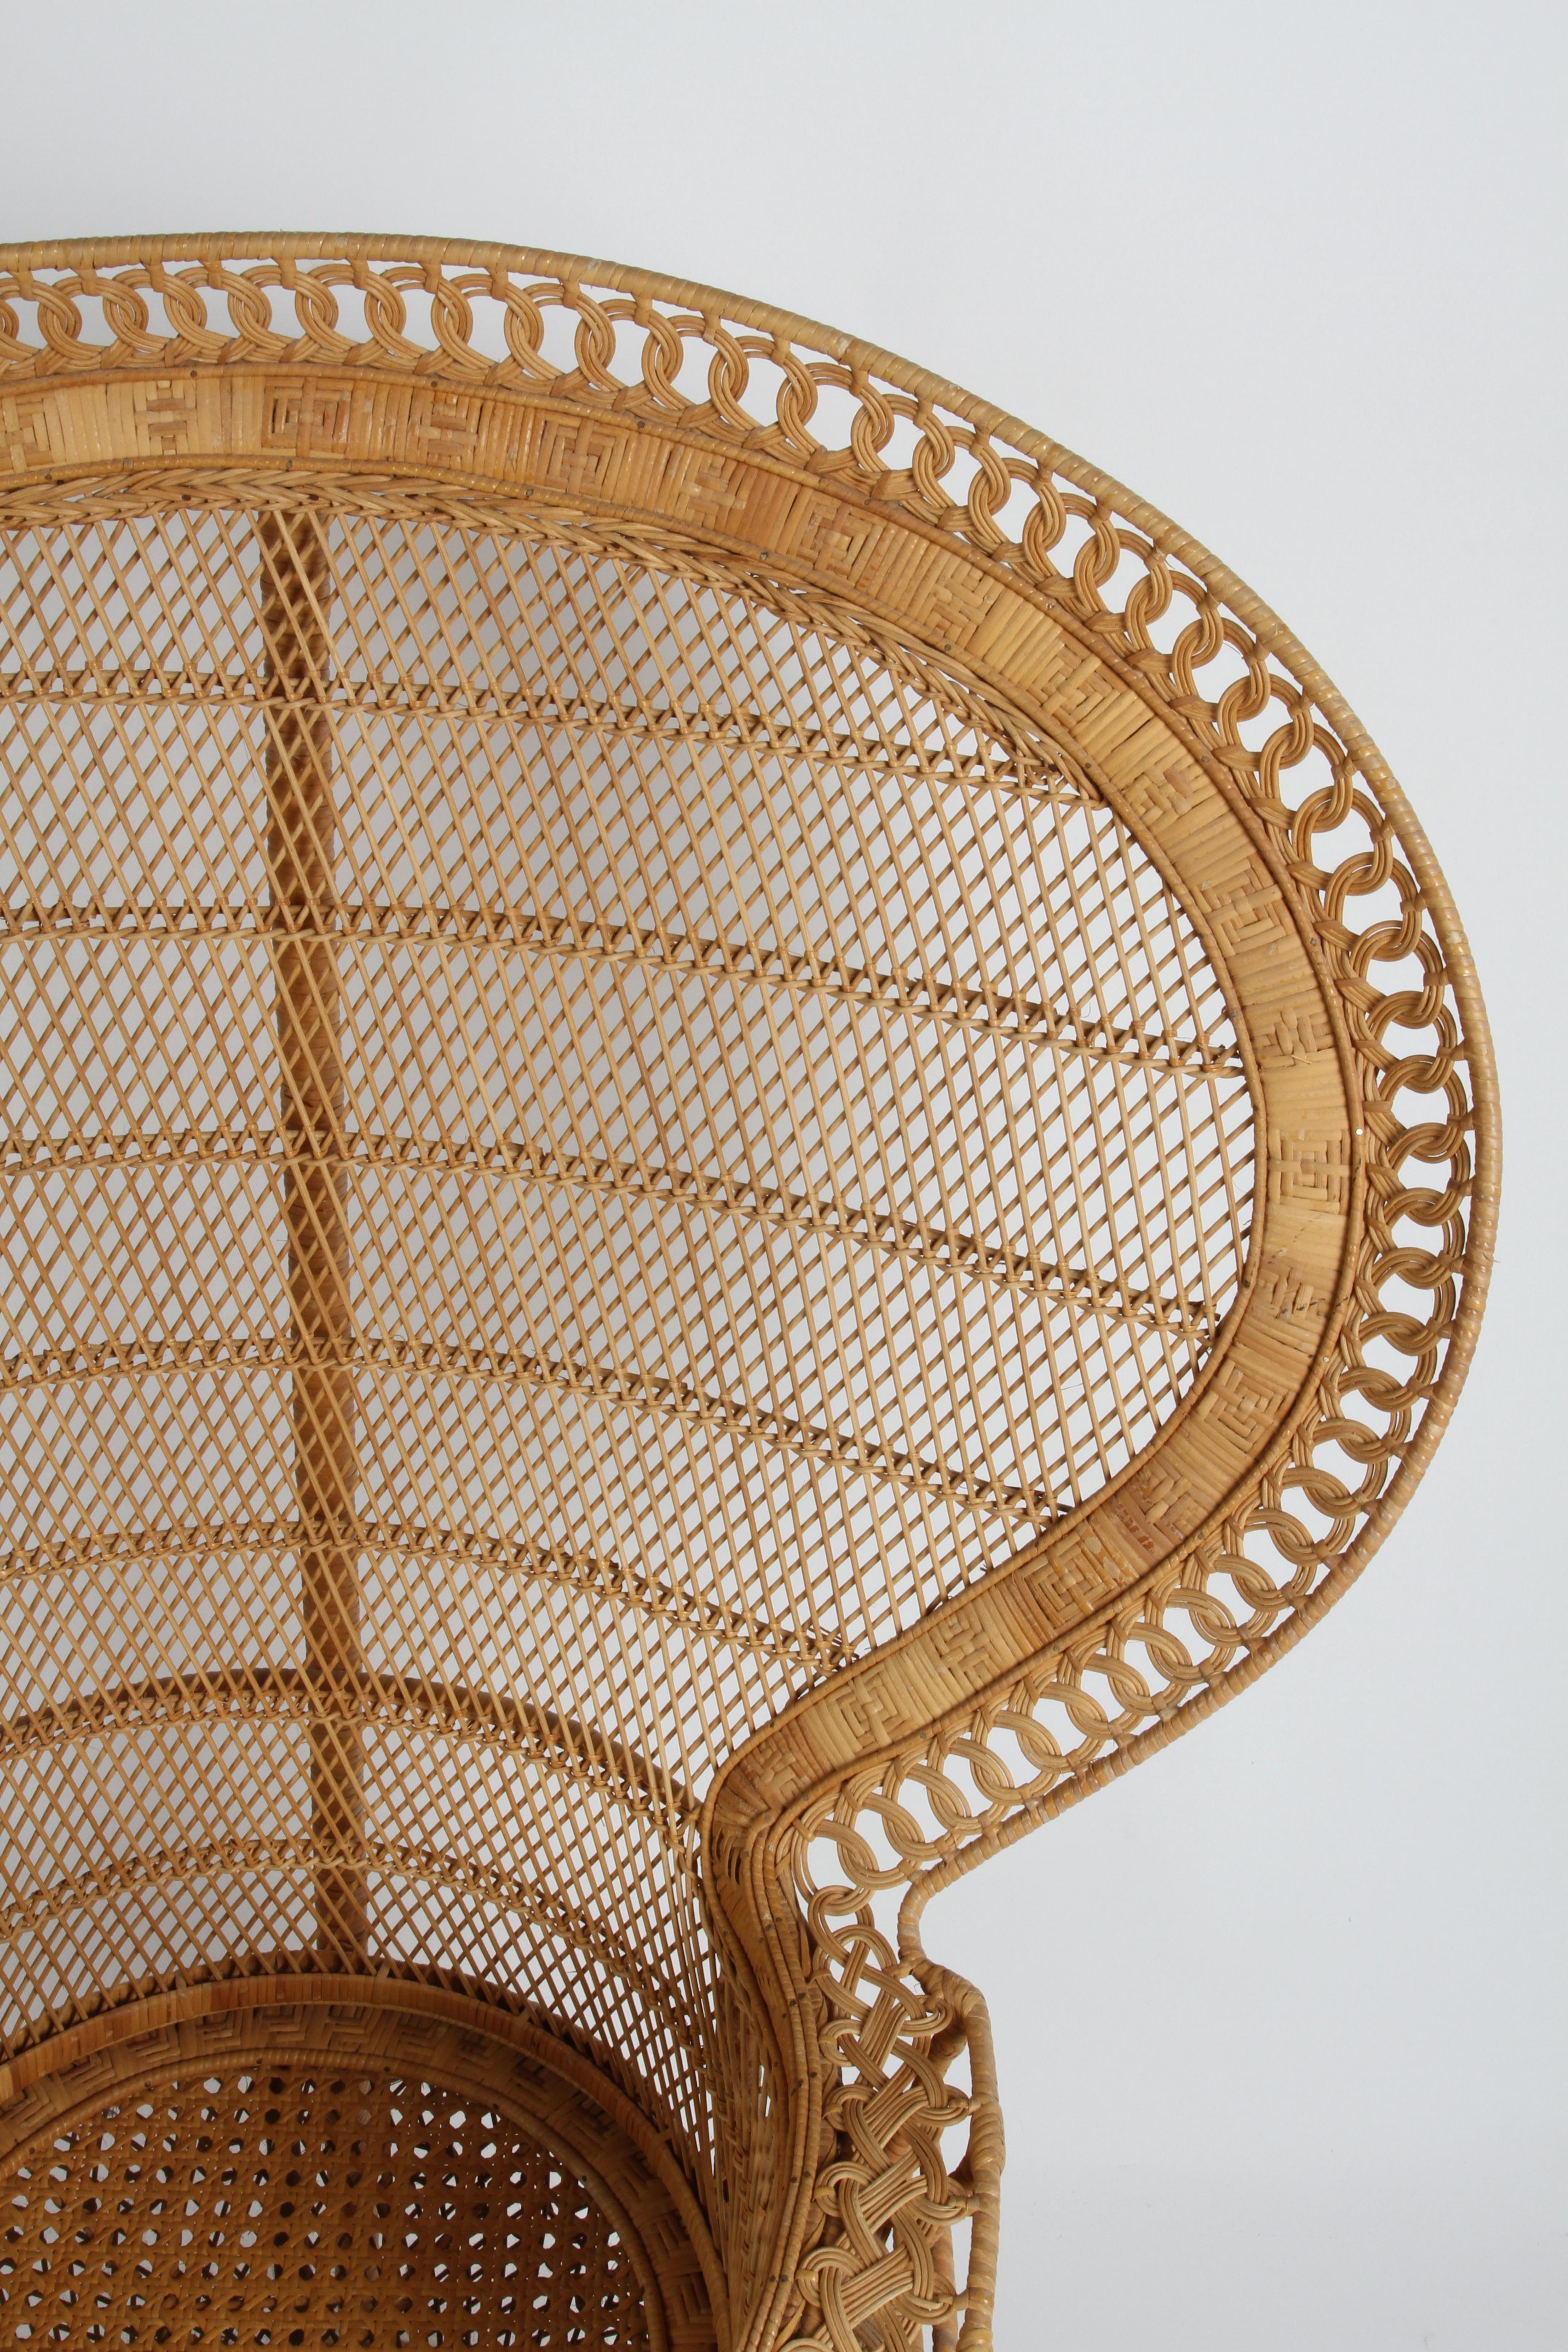 Vintage 1970s Rattan & Wicker Handcrafted Boho Chic Emmanuelle Peacock Chair 9